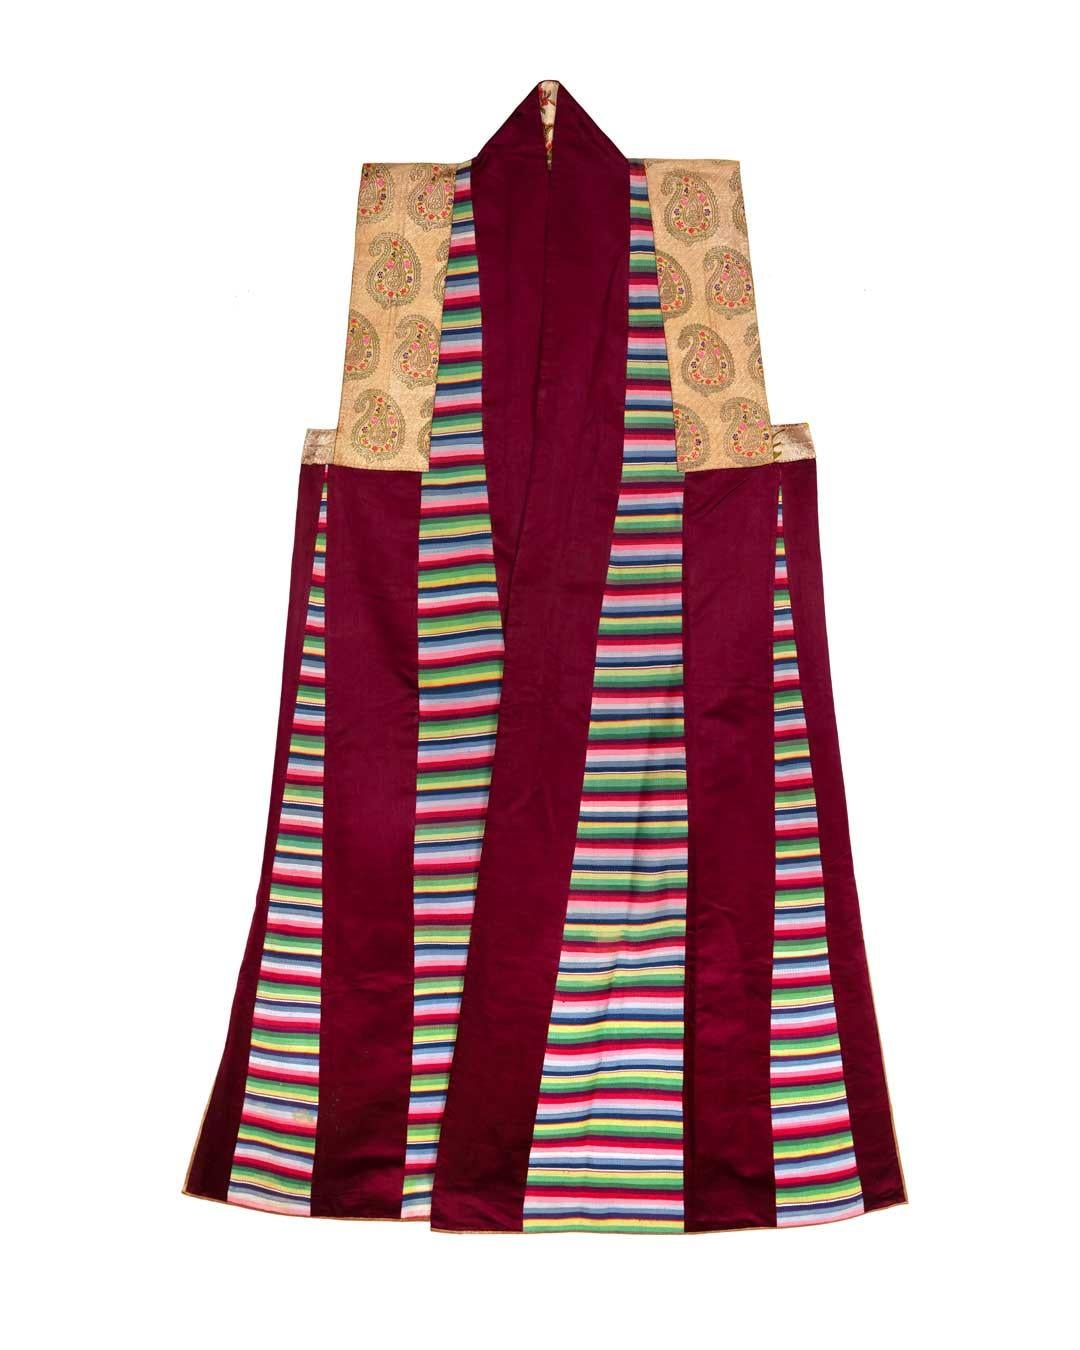 This striking silk long vest was created for a woman in 19th century Tibet. It was worn for special events and ceremonies such as weddings & religious celebrations, with many layers of clothing and jewelry. You can see an image of someone wearing it